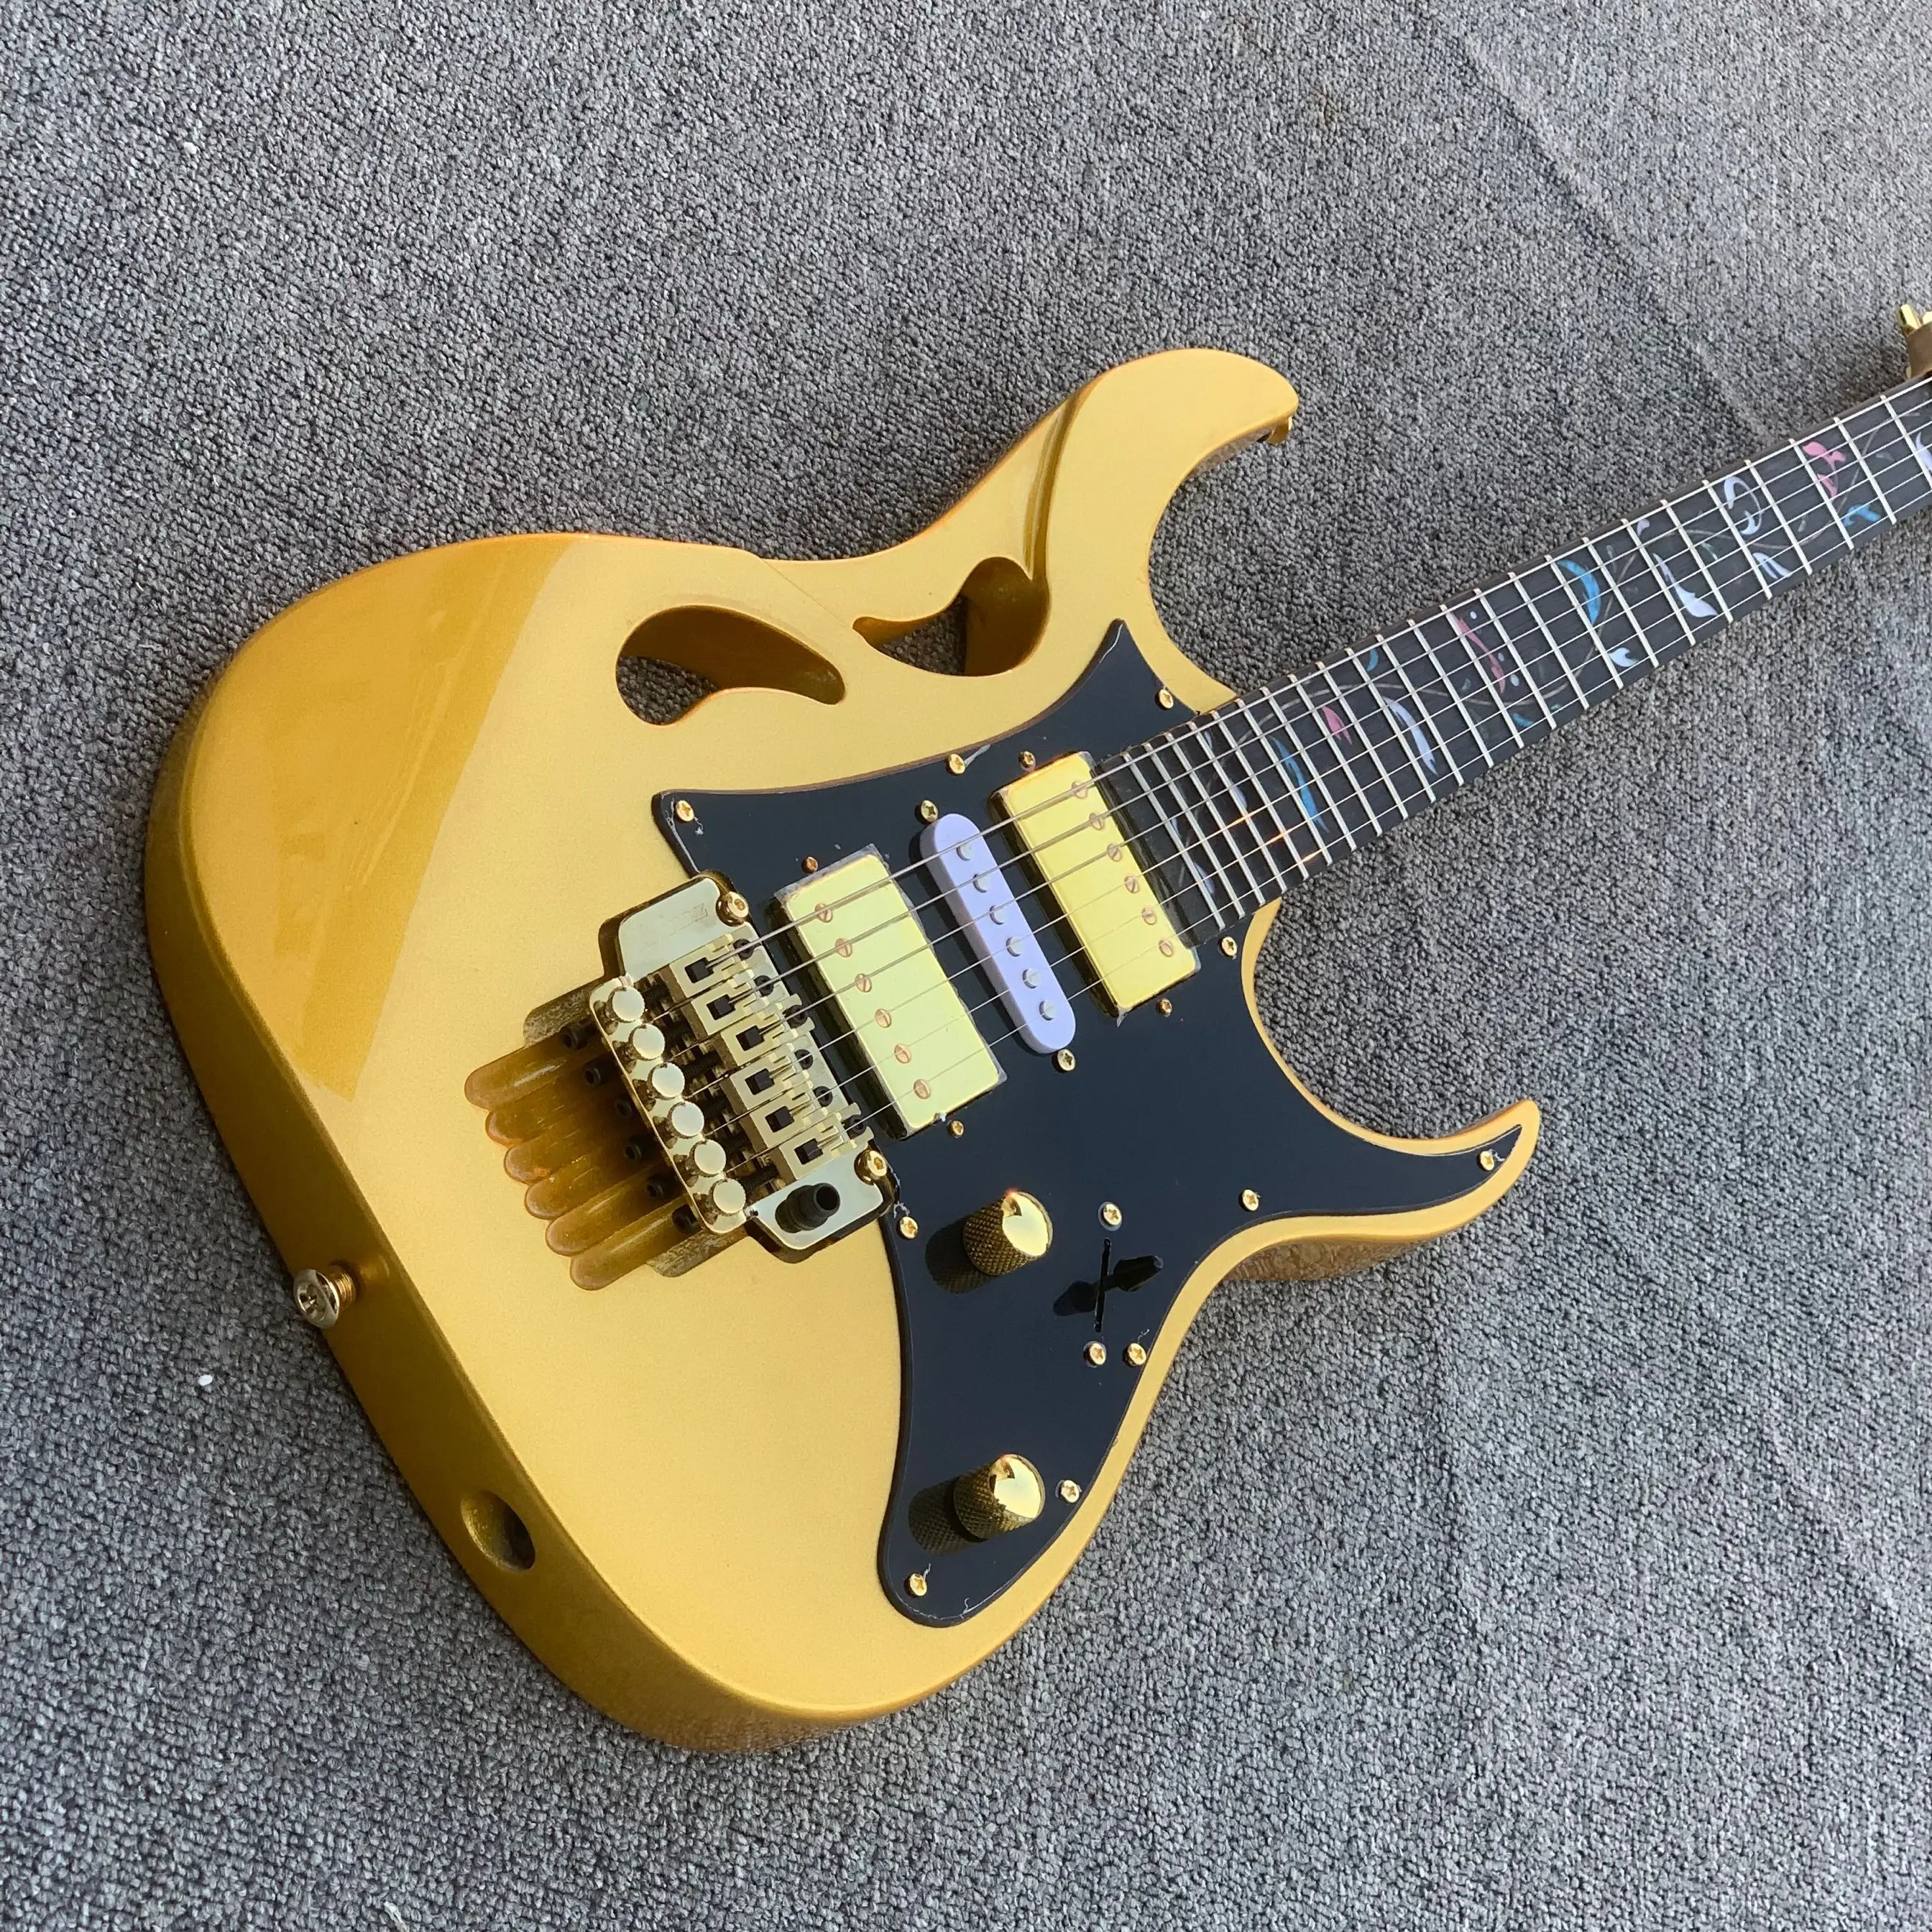 

7VV Steve Vai Panther Gold Electric Guitar Abalone Blossom Inlay Floyd Rose Tremolo Lions Claw Black Pickguard Gold Hardware